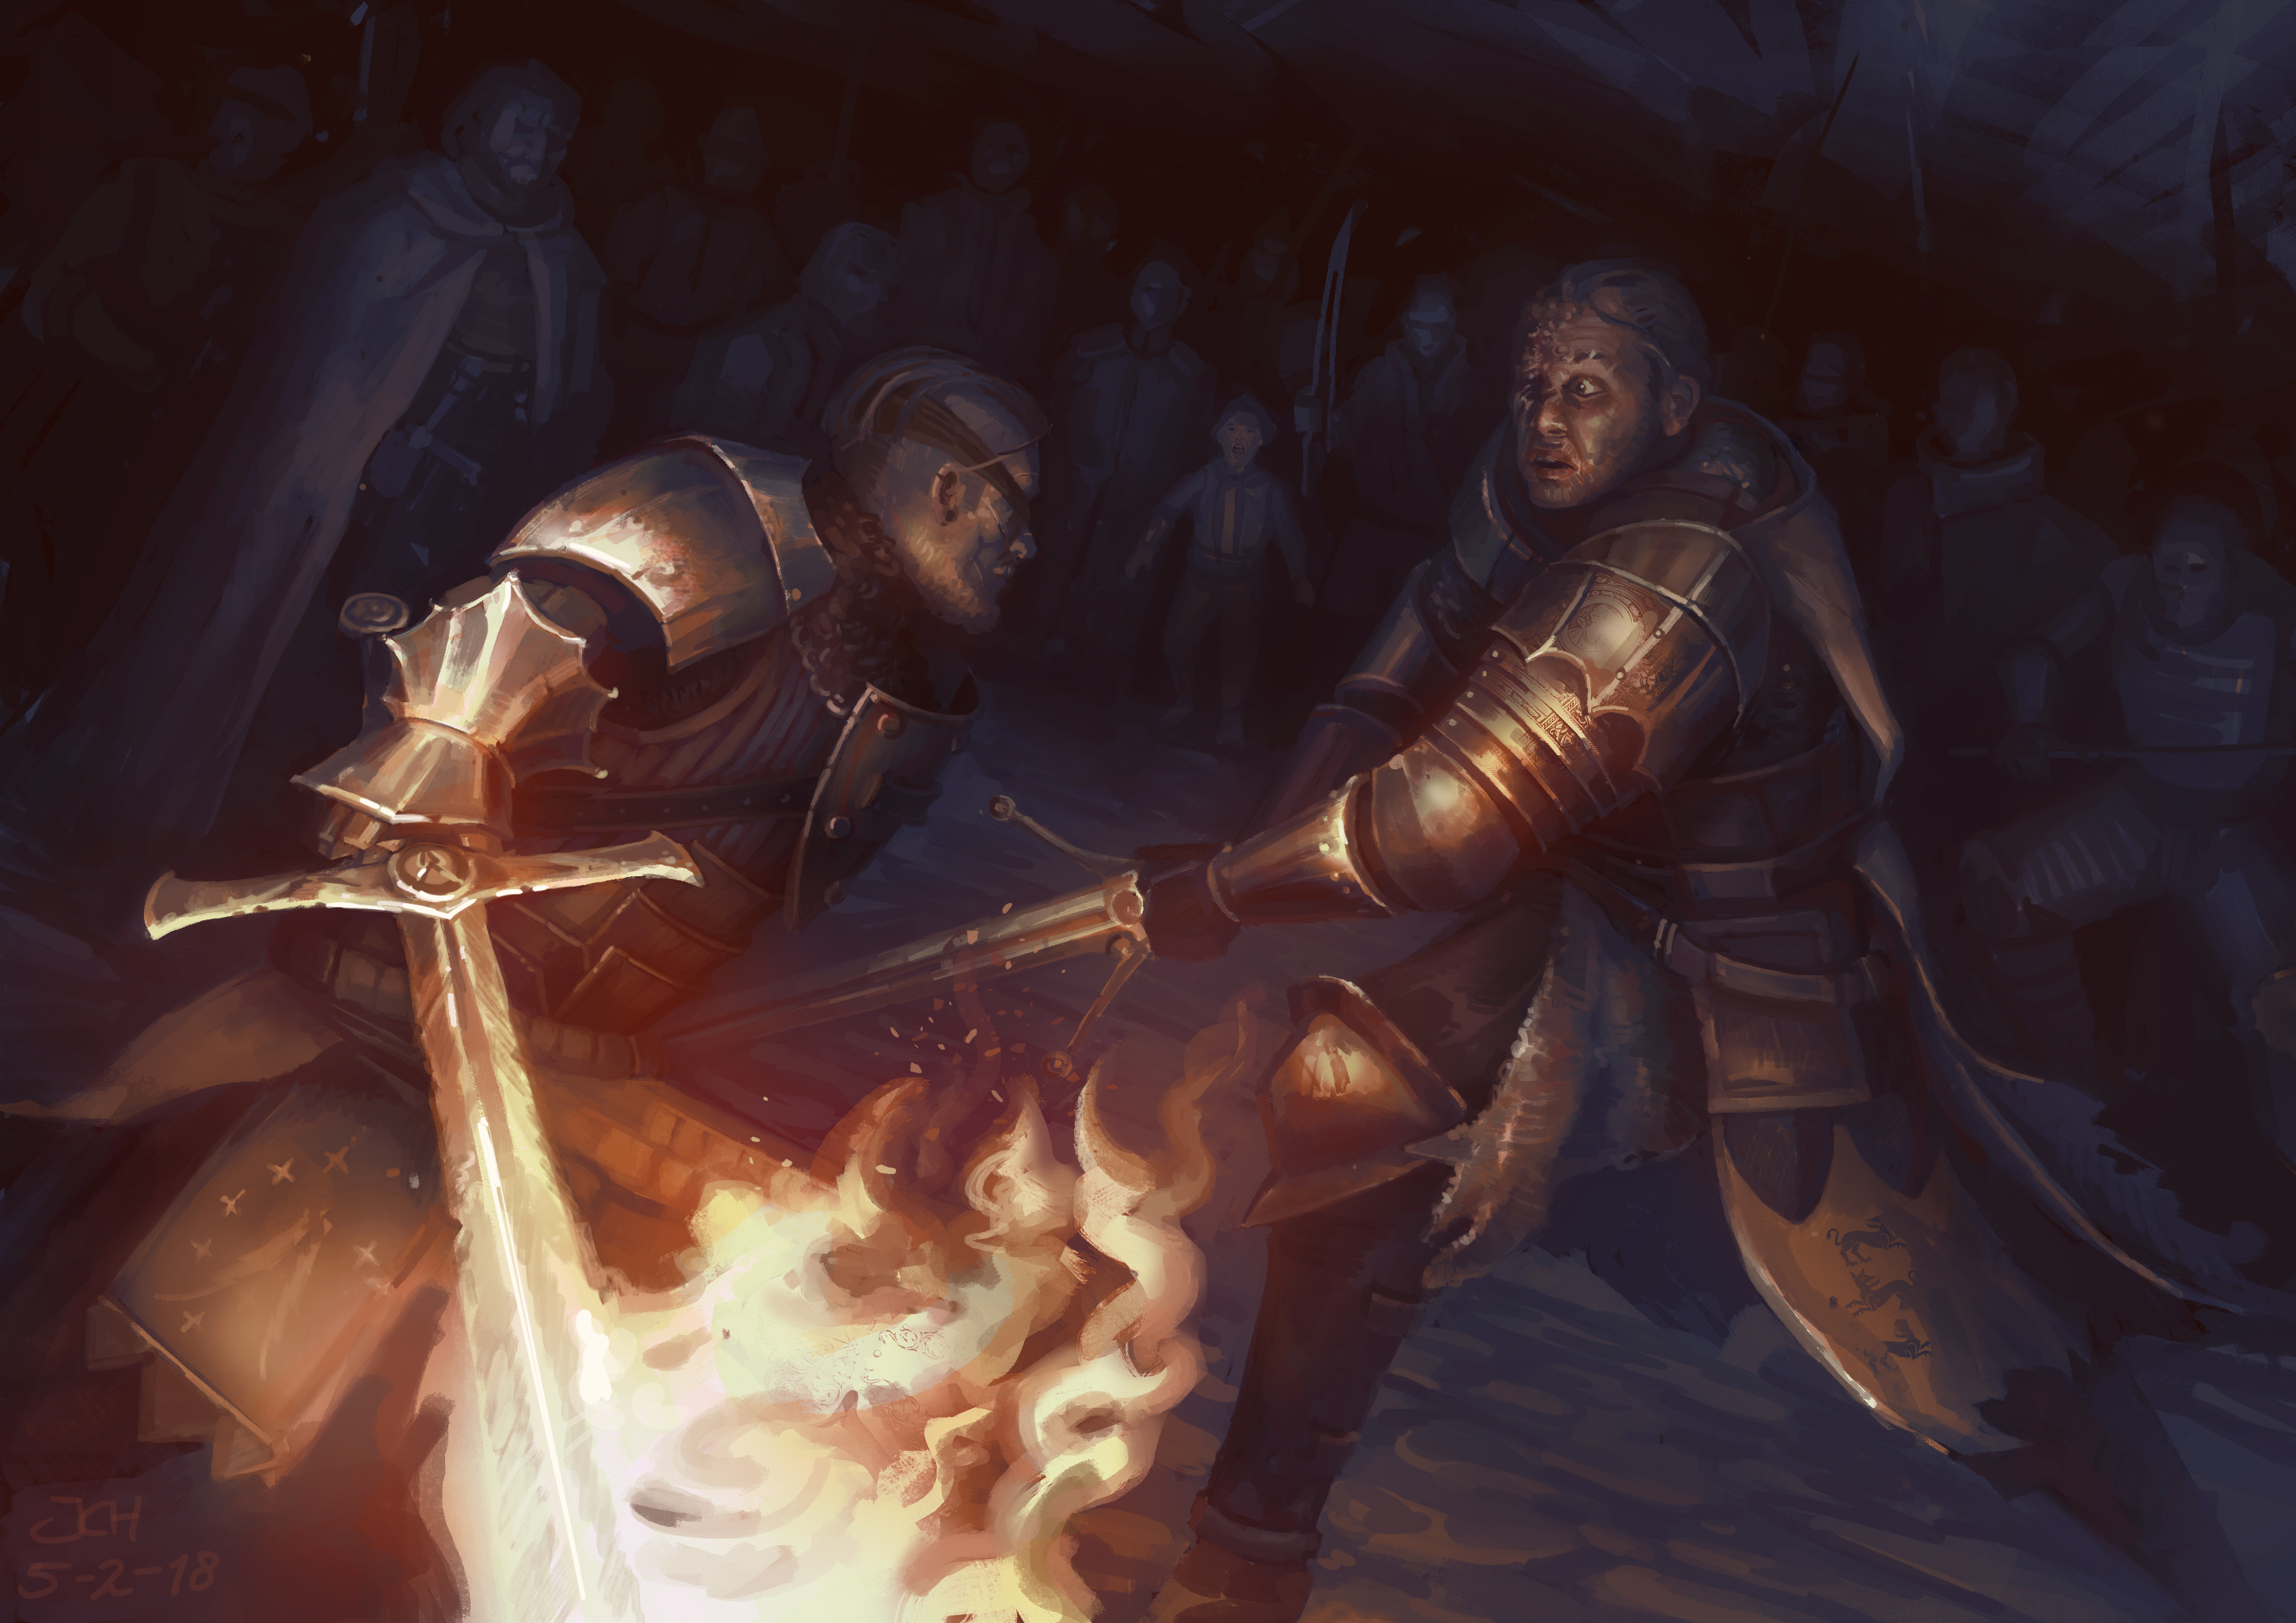 A Song of Ice and Fire - Beric Dondarrion vs Sandor Clegane by Joel Holtzman